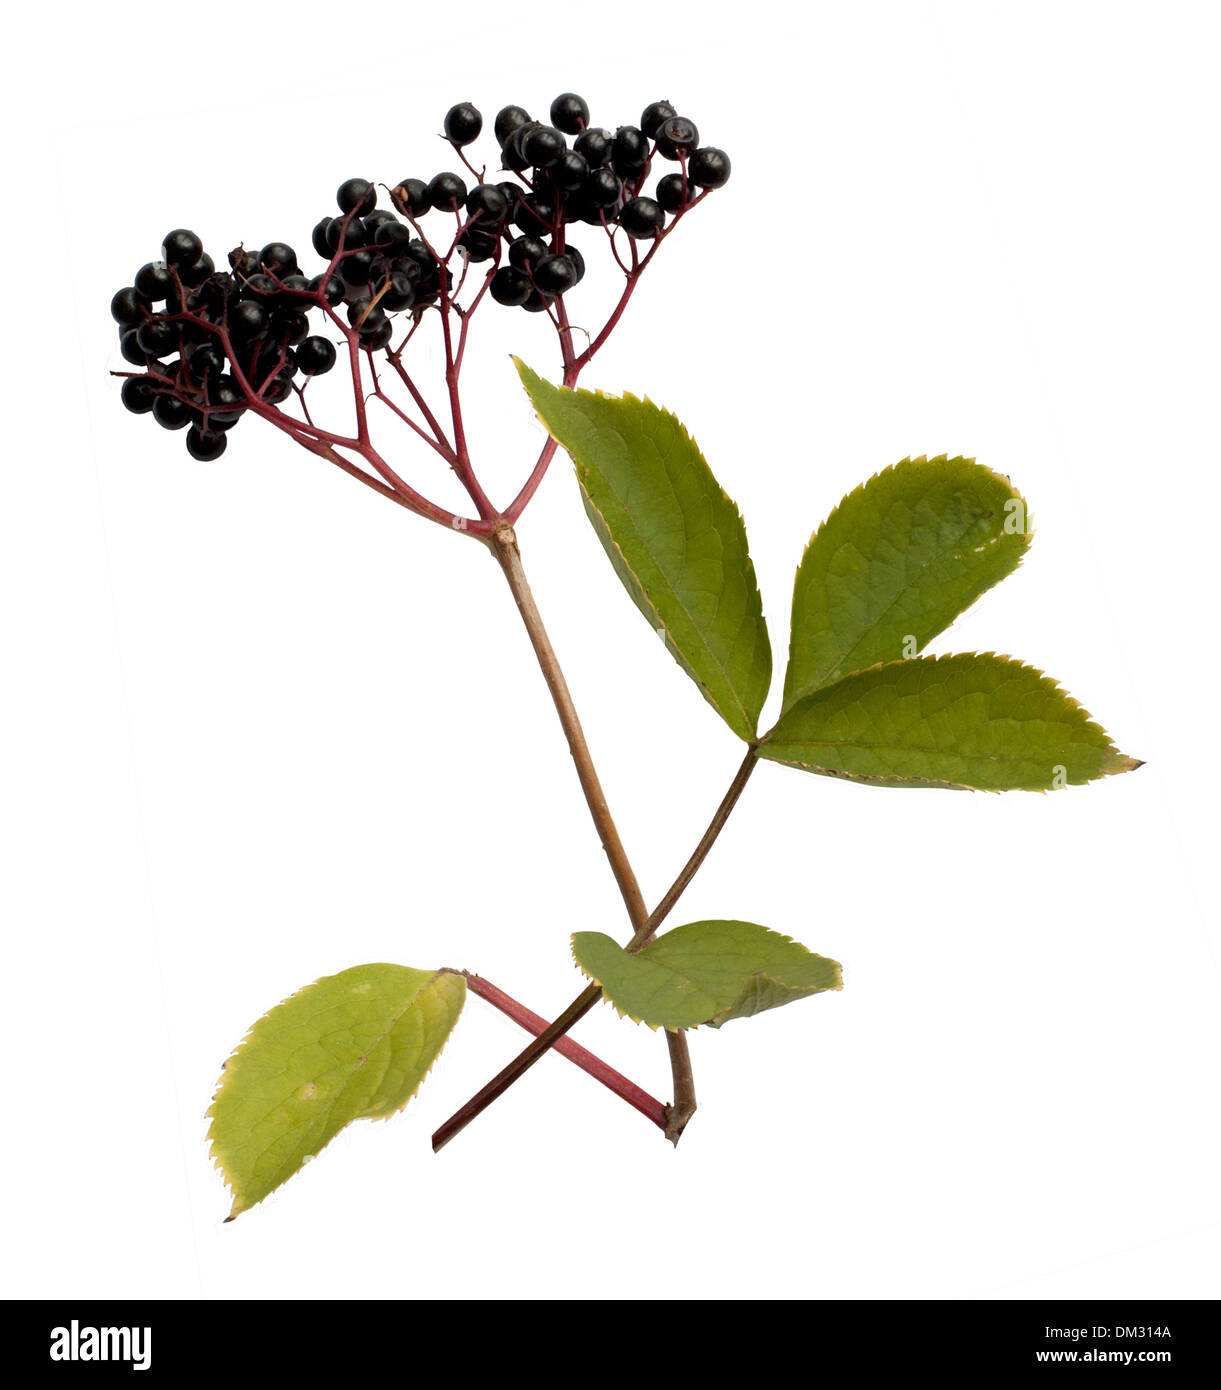 Cut-out Elderberry on white background. Stock Photo